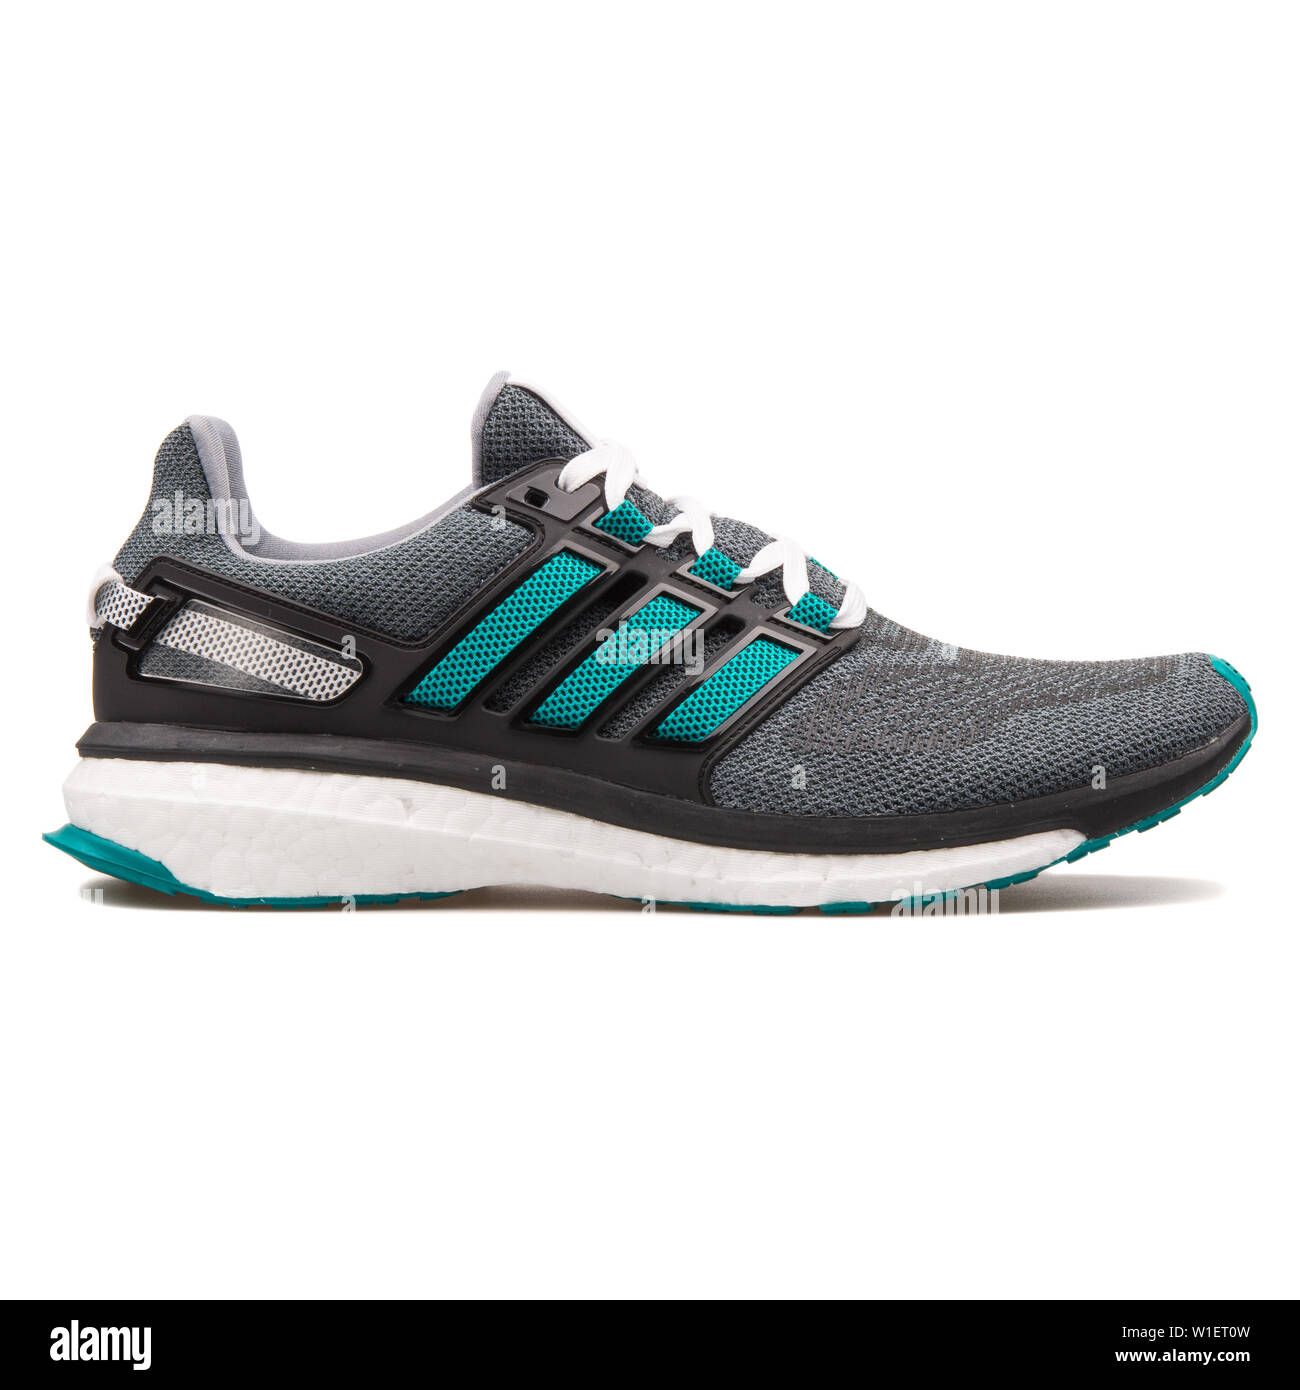 VIENNA, AUSTRIA - AUGUST 10, 2017: Adidas Energy Boost 3 black, grey and  green sneaker on white background Stock Photo - Alamy